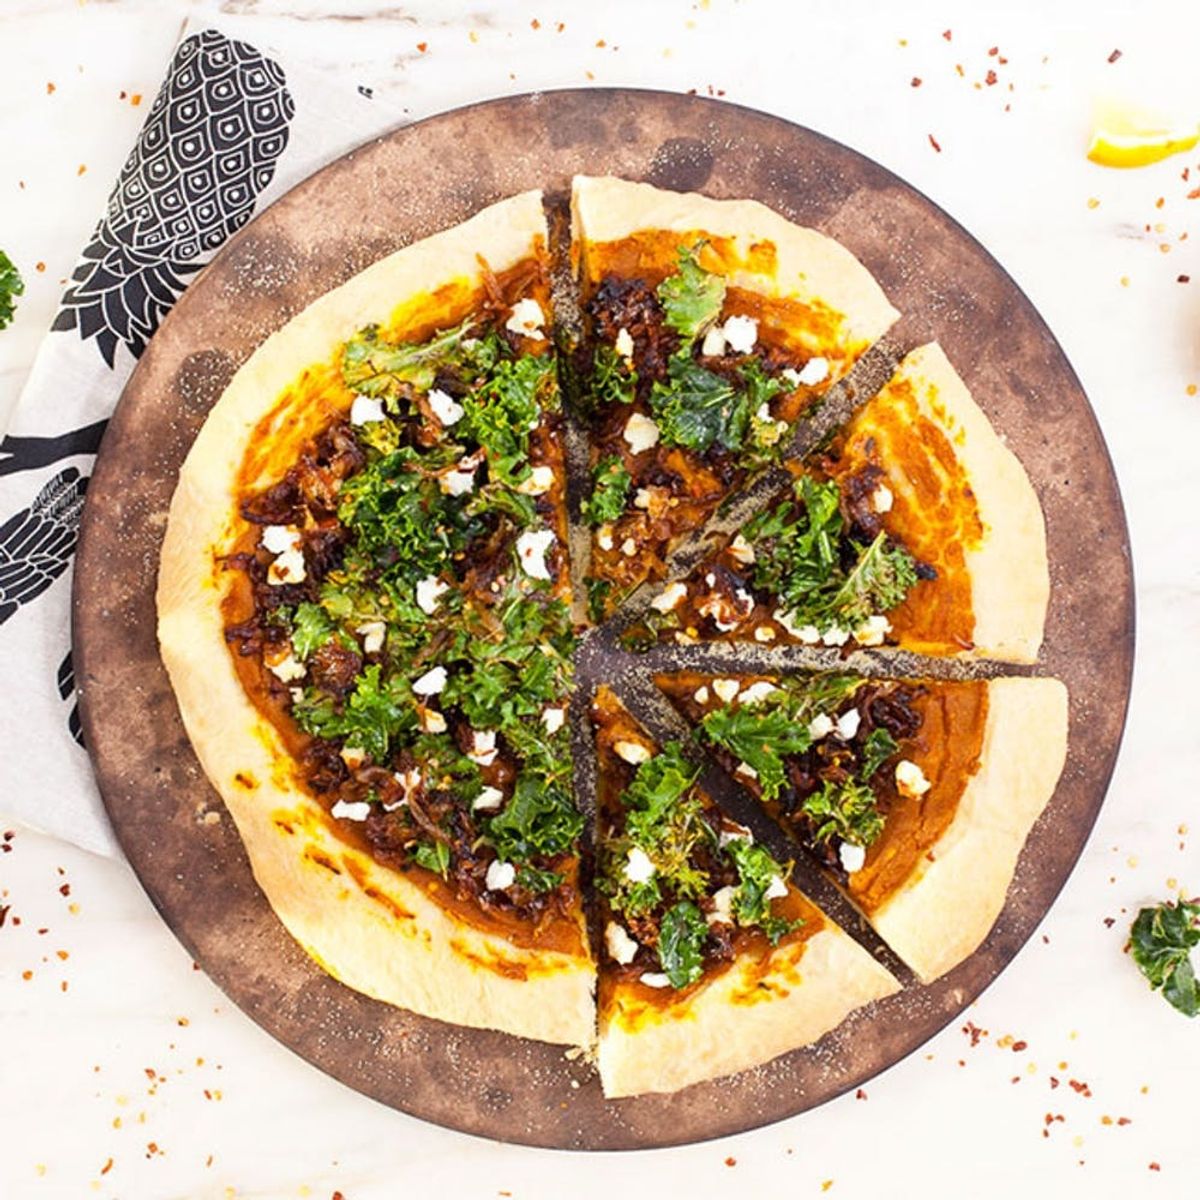 How to Make a Roasted Butternut Squash Pizza in 20 Minutes